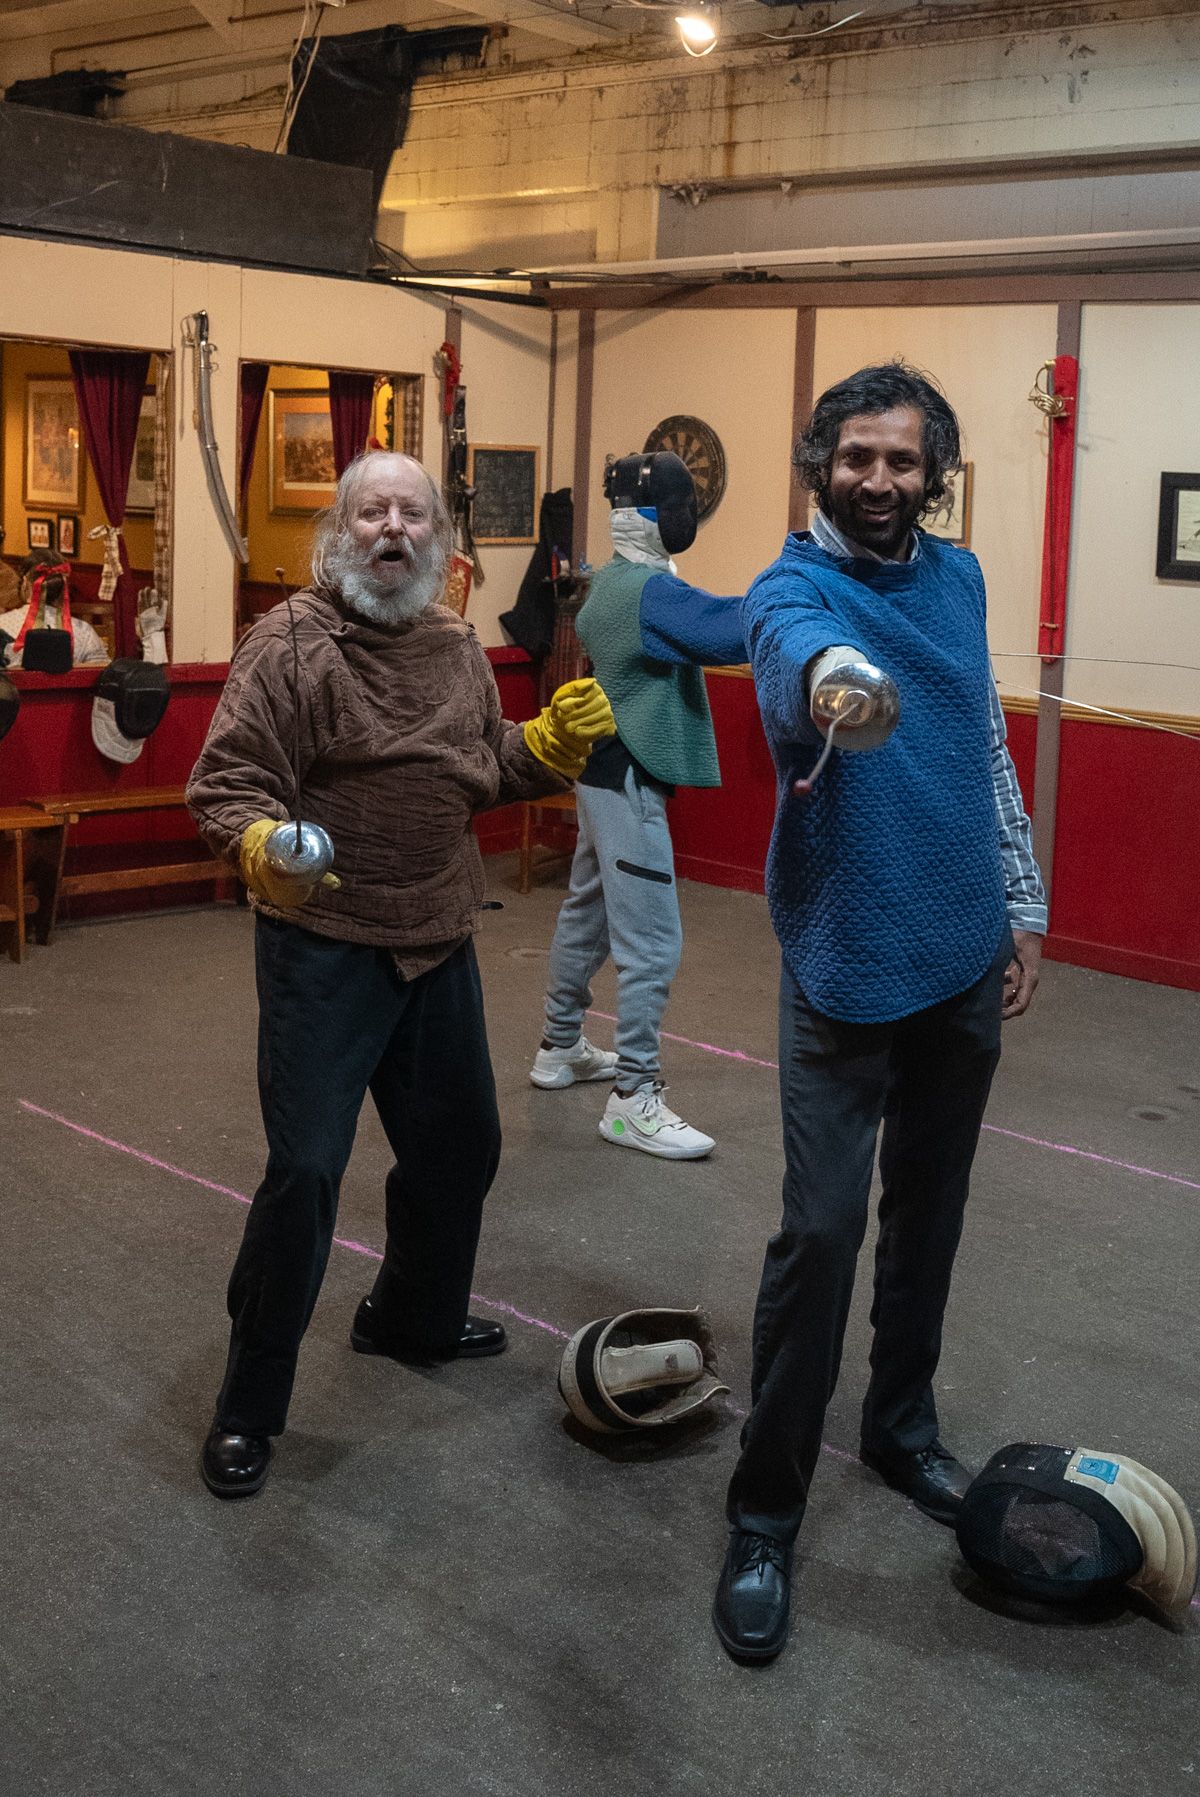 A man in a blue fencing outfit smiles beside an older man with a white beard as they hold up swords in a fencing studio.